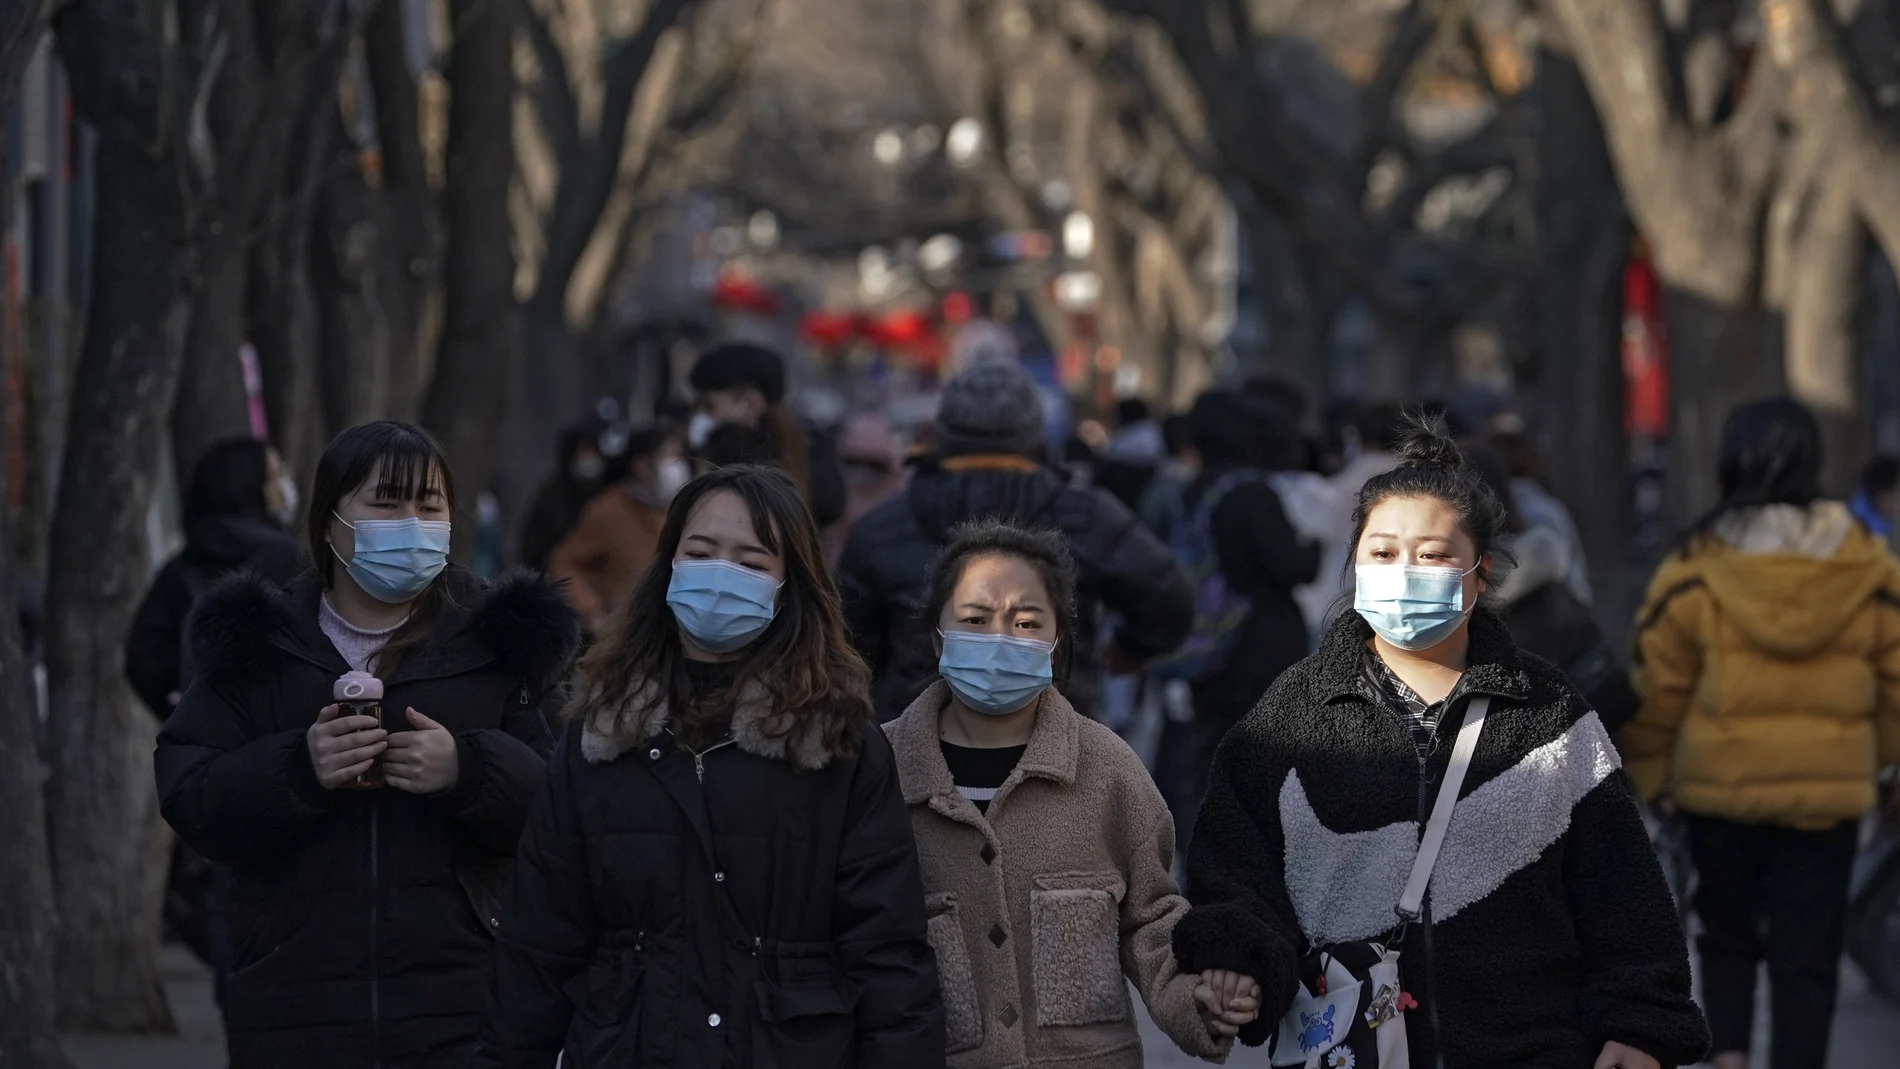 Visitors wearing face masks to help curb the spread of the coronavirus tour the Nanluoguxiang, the capital city's popular tourist spot on the fifth day of the Lunar Chinese New Year in Beijing, Tuesday, Feb. 16, 2021. (AP Photo/Andy Wong)